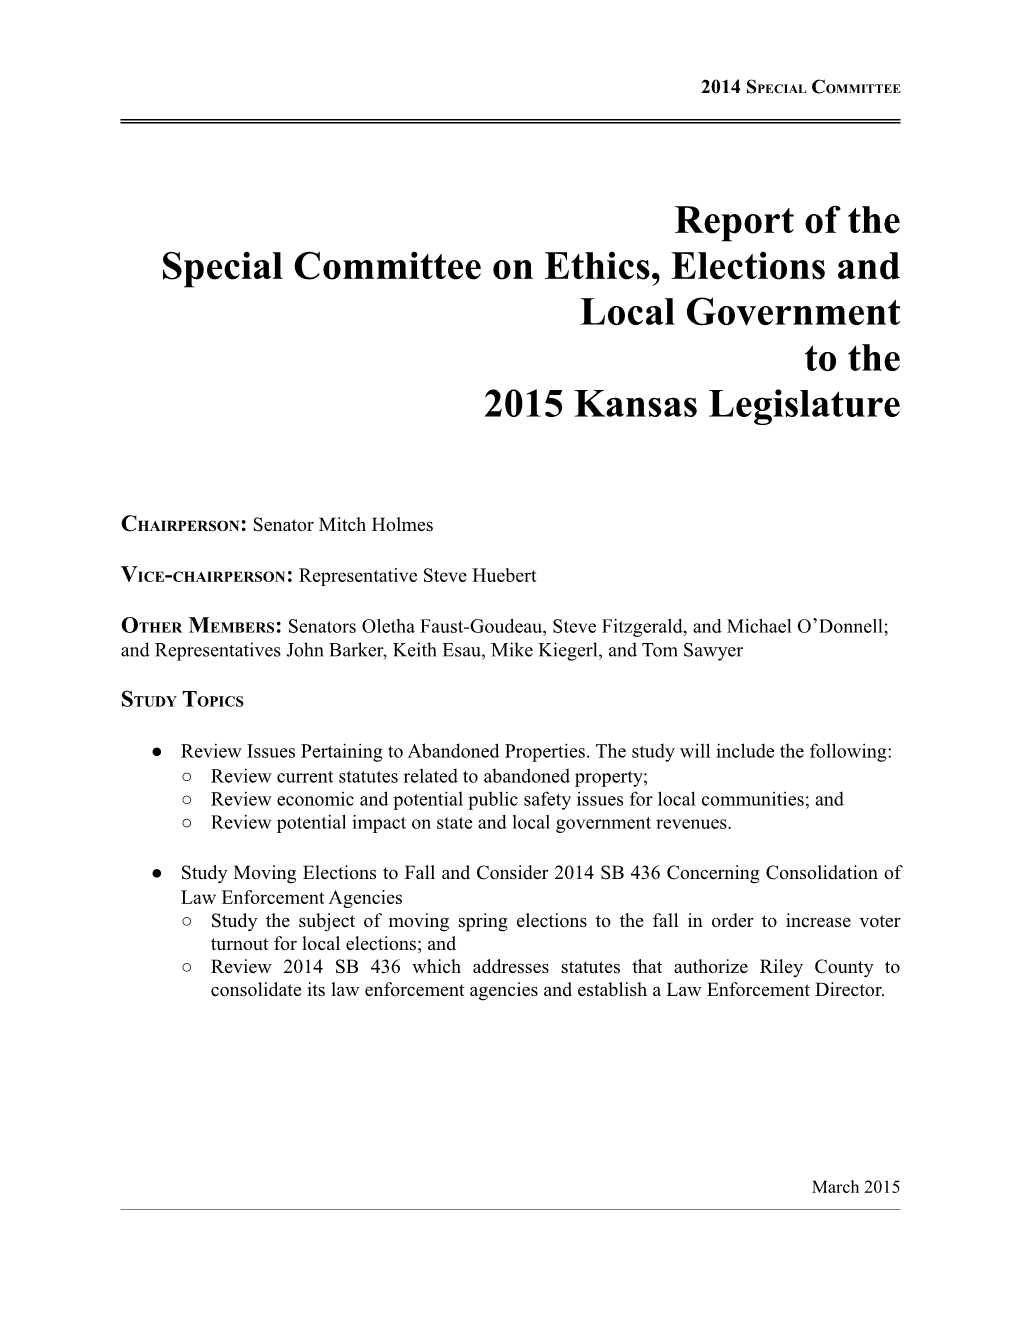 Report of the Special Committee on Ethics, Elections and Local Government to the 2015 Kansas Legislature